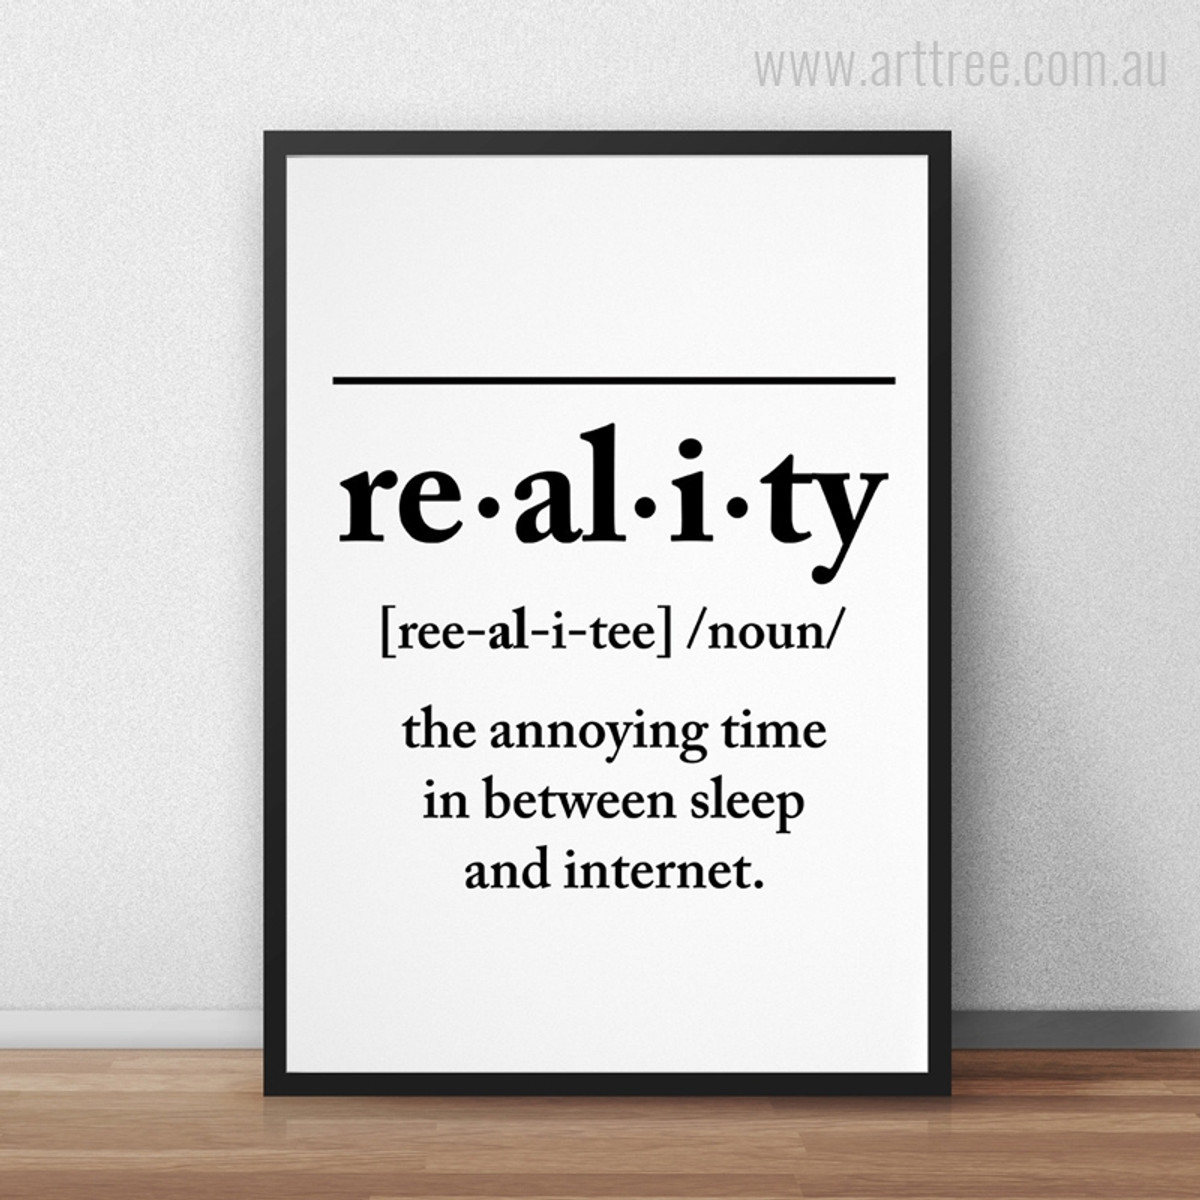 The Annoying Time in Between Sleep and Internet Words Canvas Print